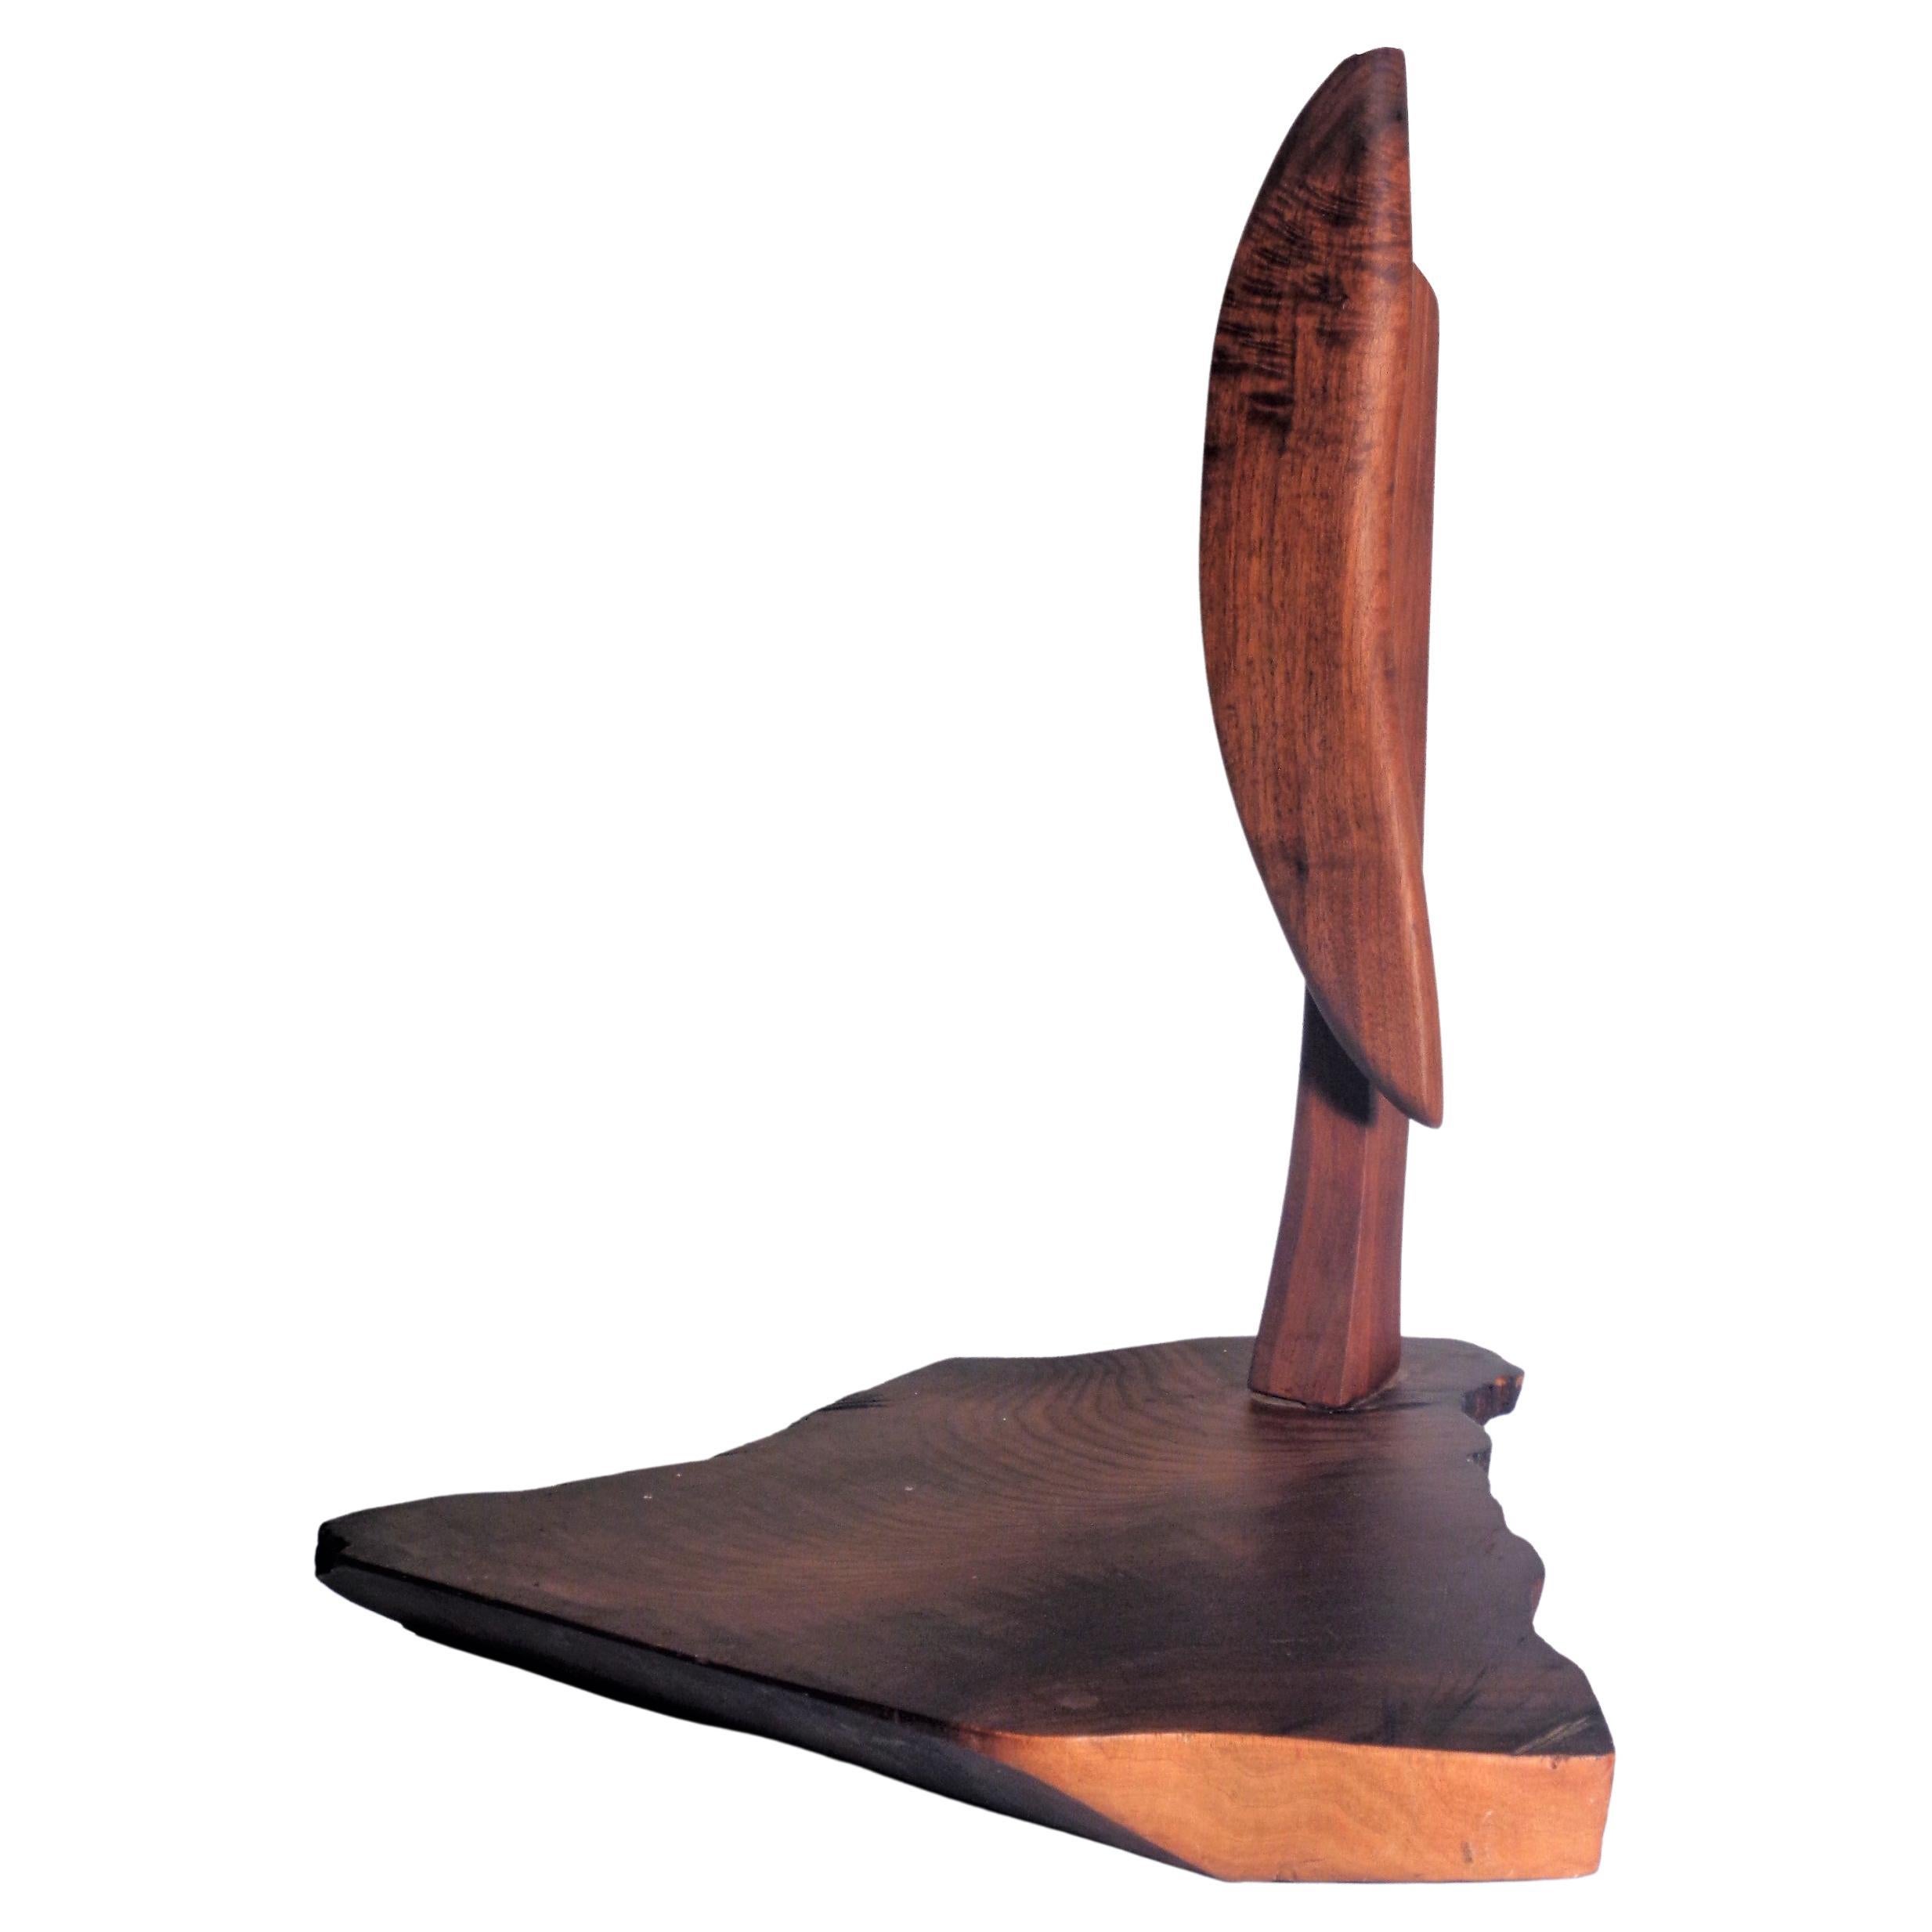 American studio craft movement abstract carved wood sculpture. Minimalistic bust ( head and neck ) set into free form rough cut beautifully figured wood base. Attributed to well renowned American artist sculptor Margery Goldberg ( b. 1950 ) founder